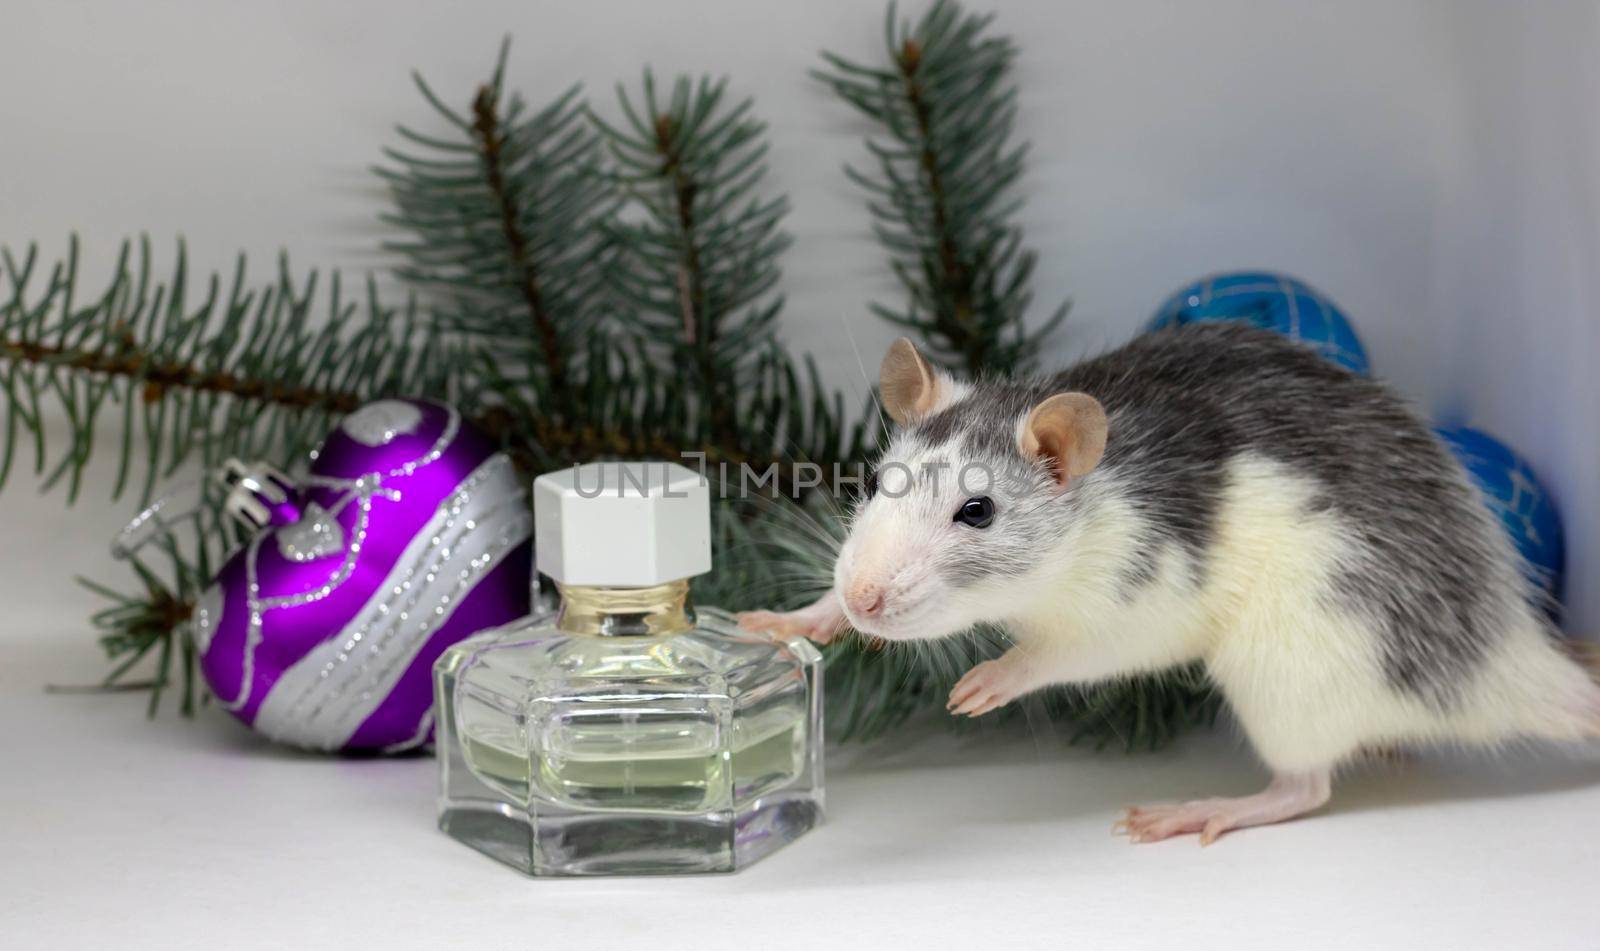 Silver rat on white background sitting a round a perfume bottle. concept. rat is the symbol of the Chinese New Year 2020.